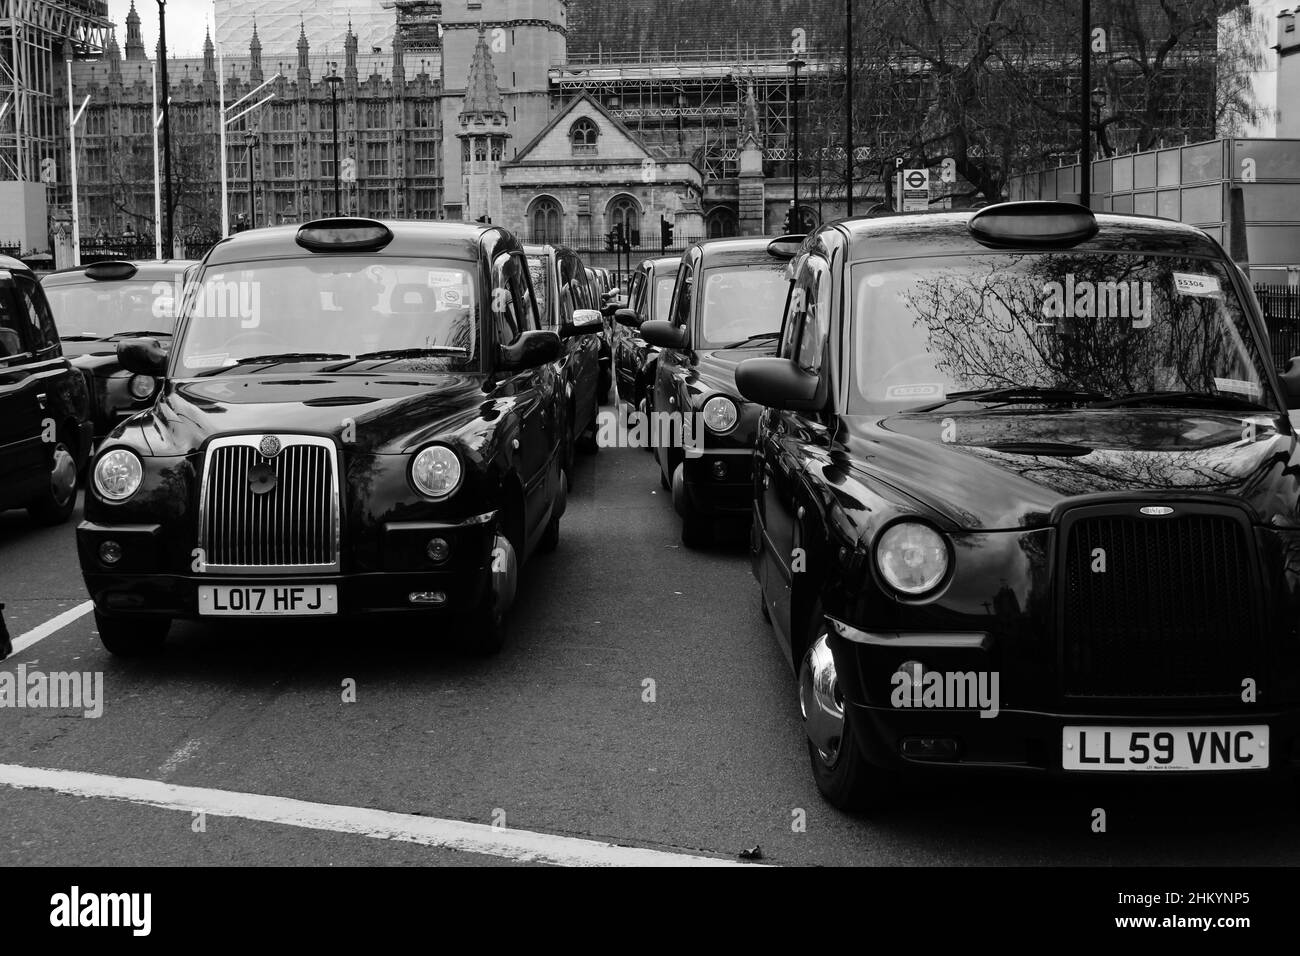 Taxi's on strike in London march 2019 Stock Photo